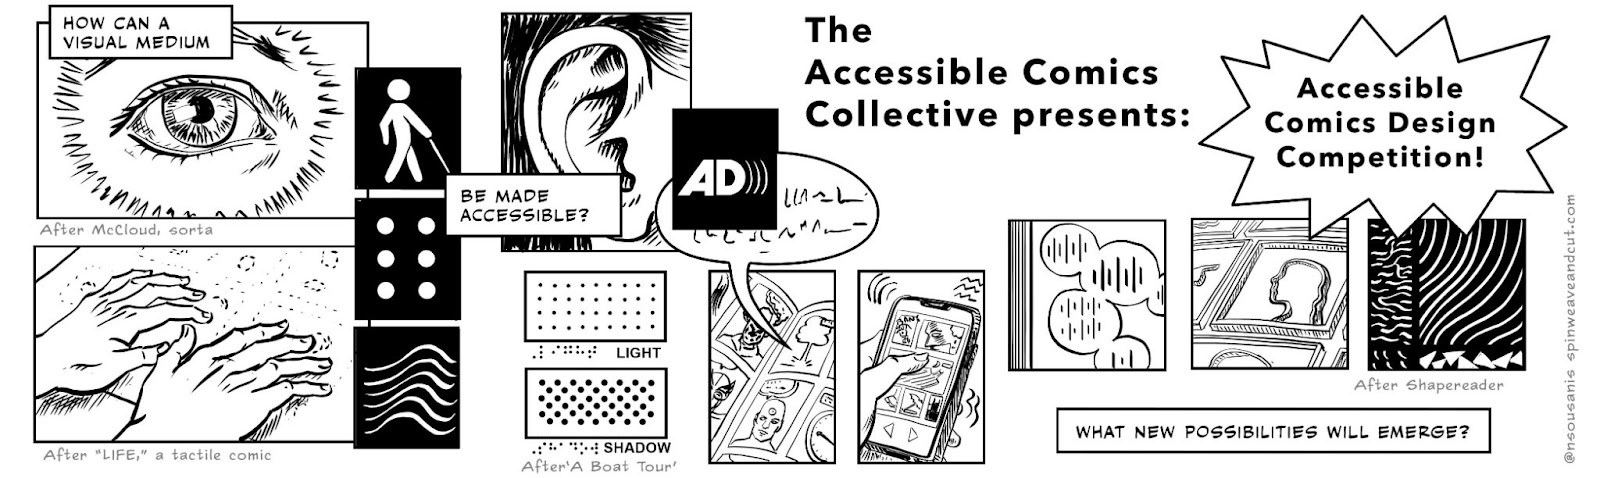 Event banner: Text reads, "The Accessible Comics Collective presents: Accessible Comics Design Competition! What new possibilities will emerge?" A montage of images includes an eye, hands on braille accessing "Life" a tactile comic, a comic book with an audio bubble coming out, and interactive comic on a tablet, and other images that play with access and comics. 